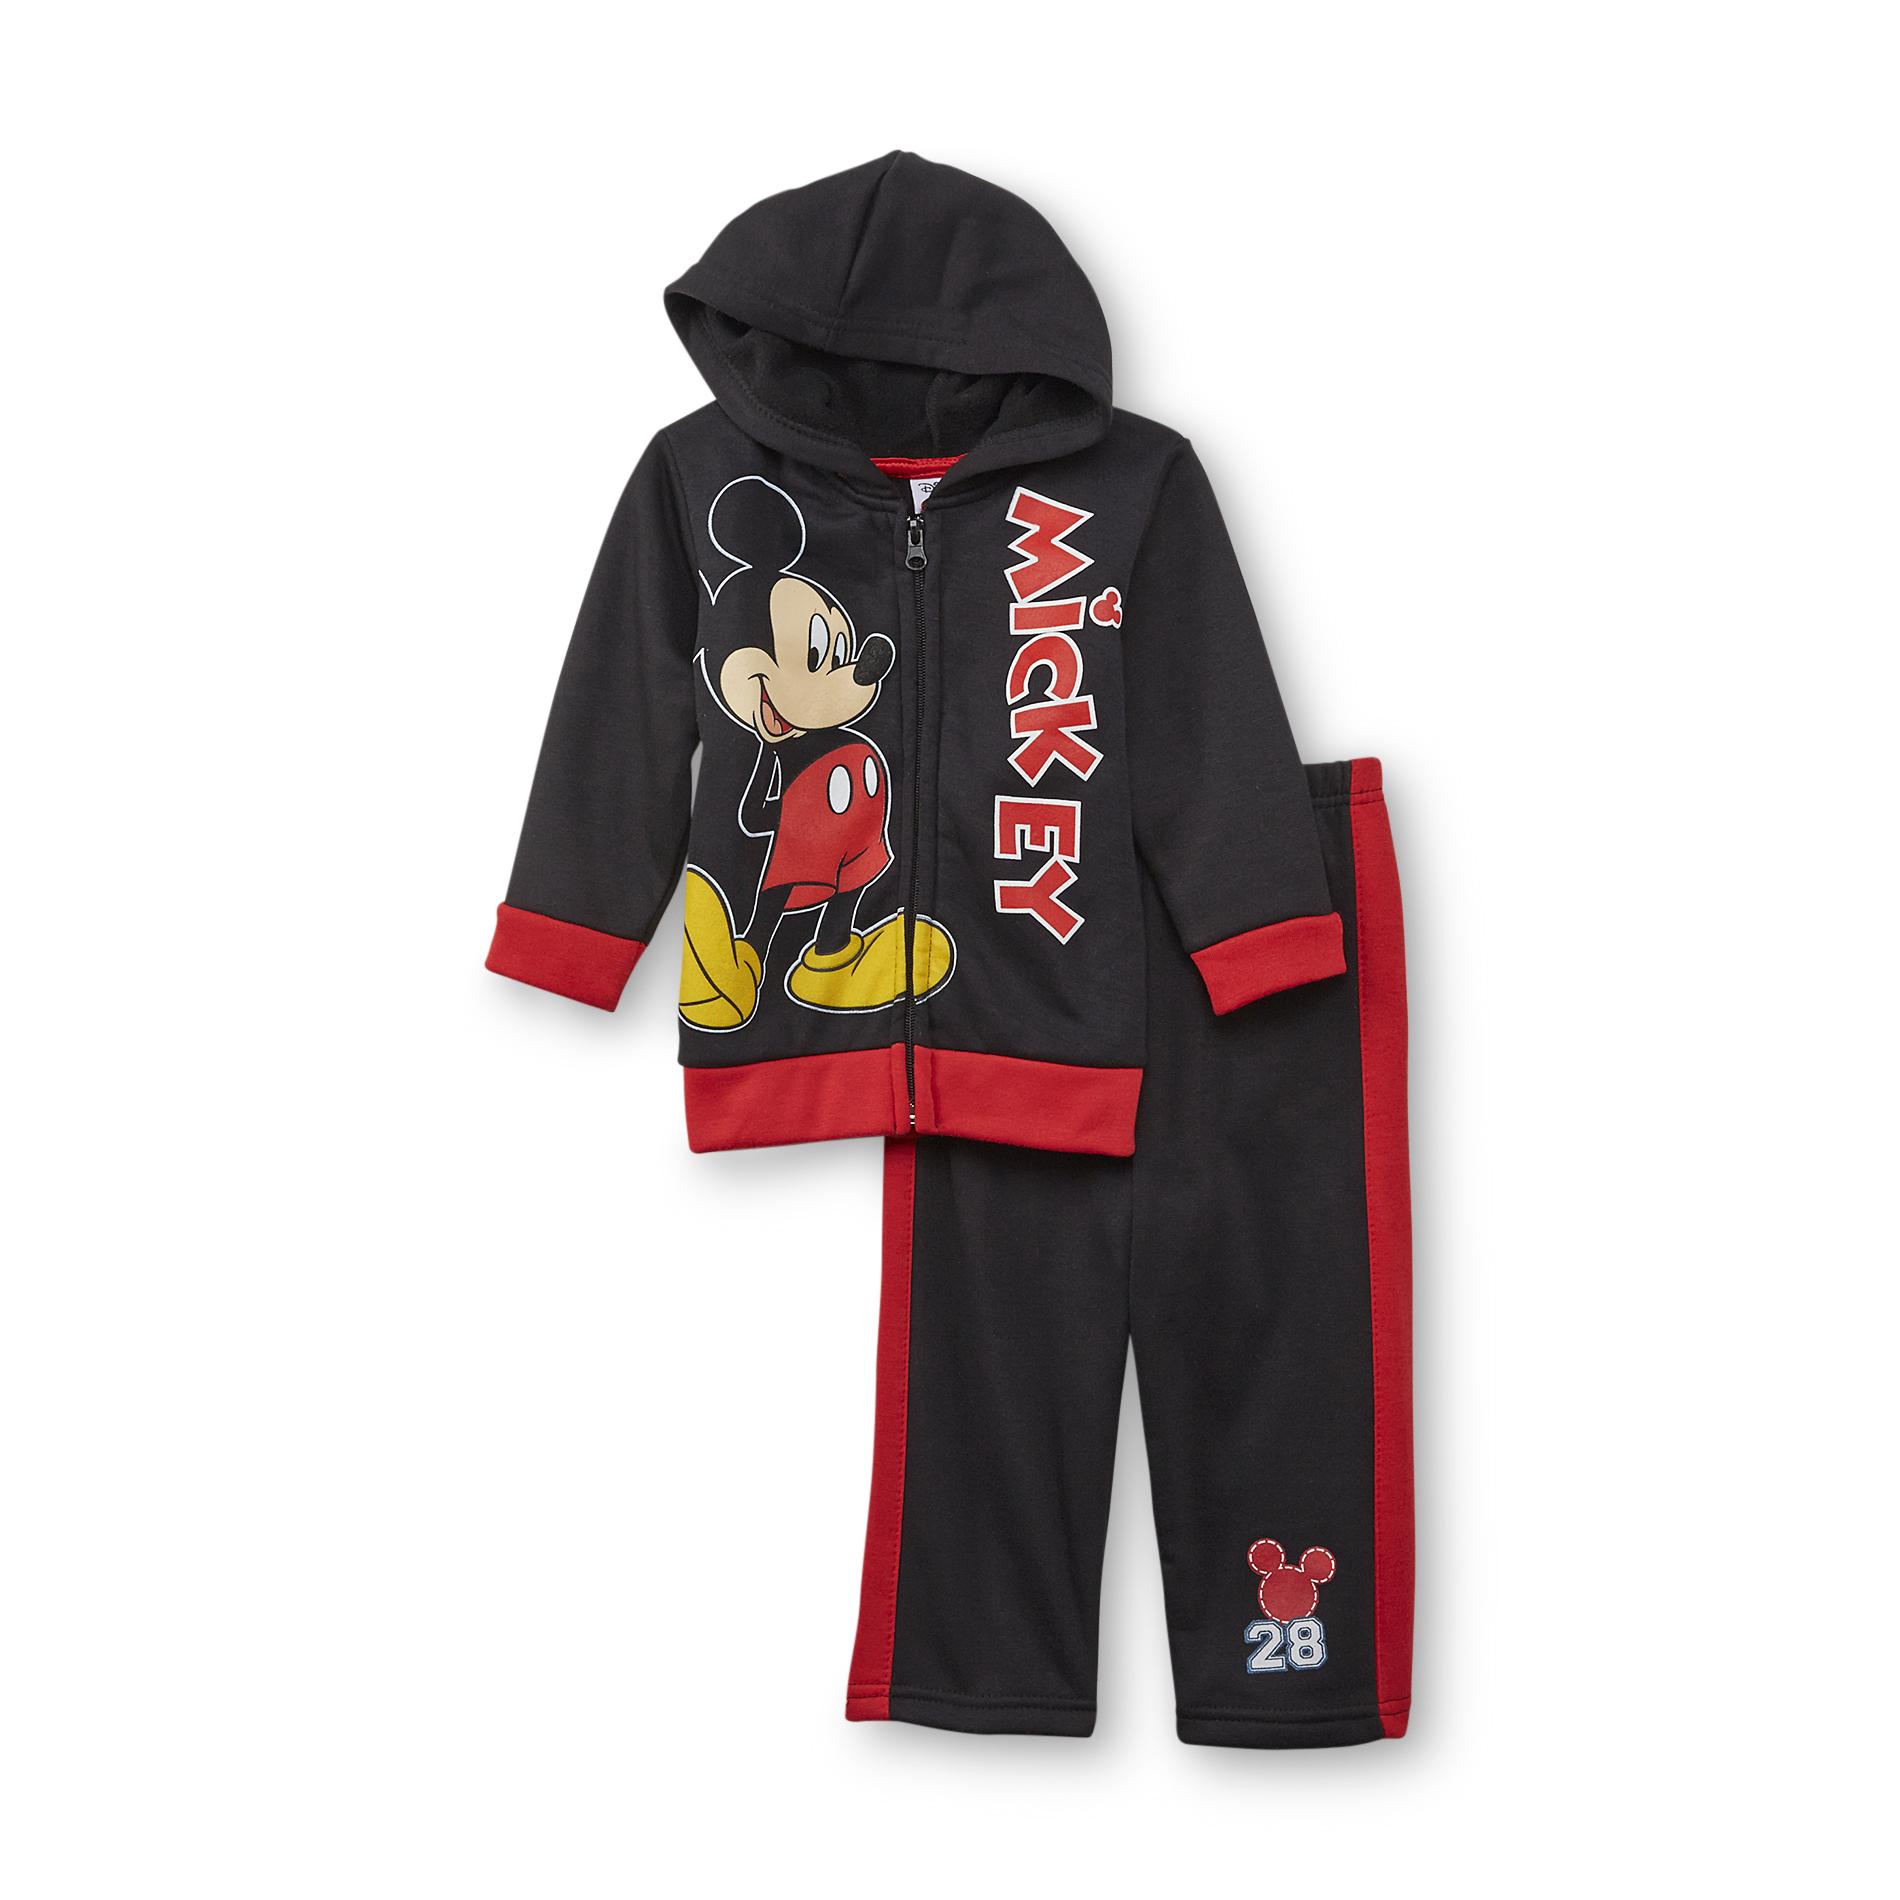 Disney Mickey Mouse Infant & Toddler Boy's Hoodie Jacket & Athletic Pants